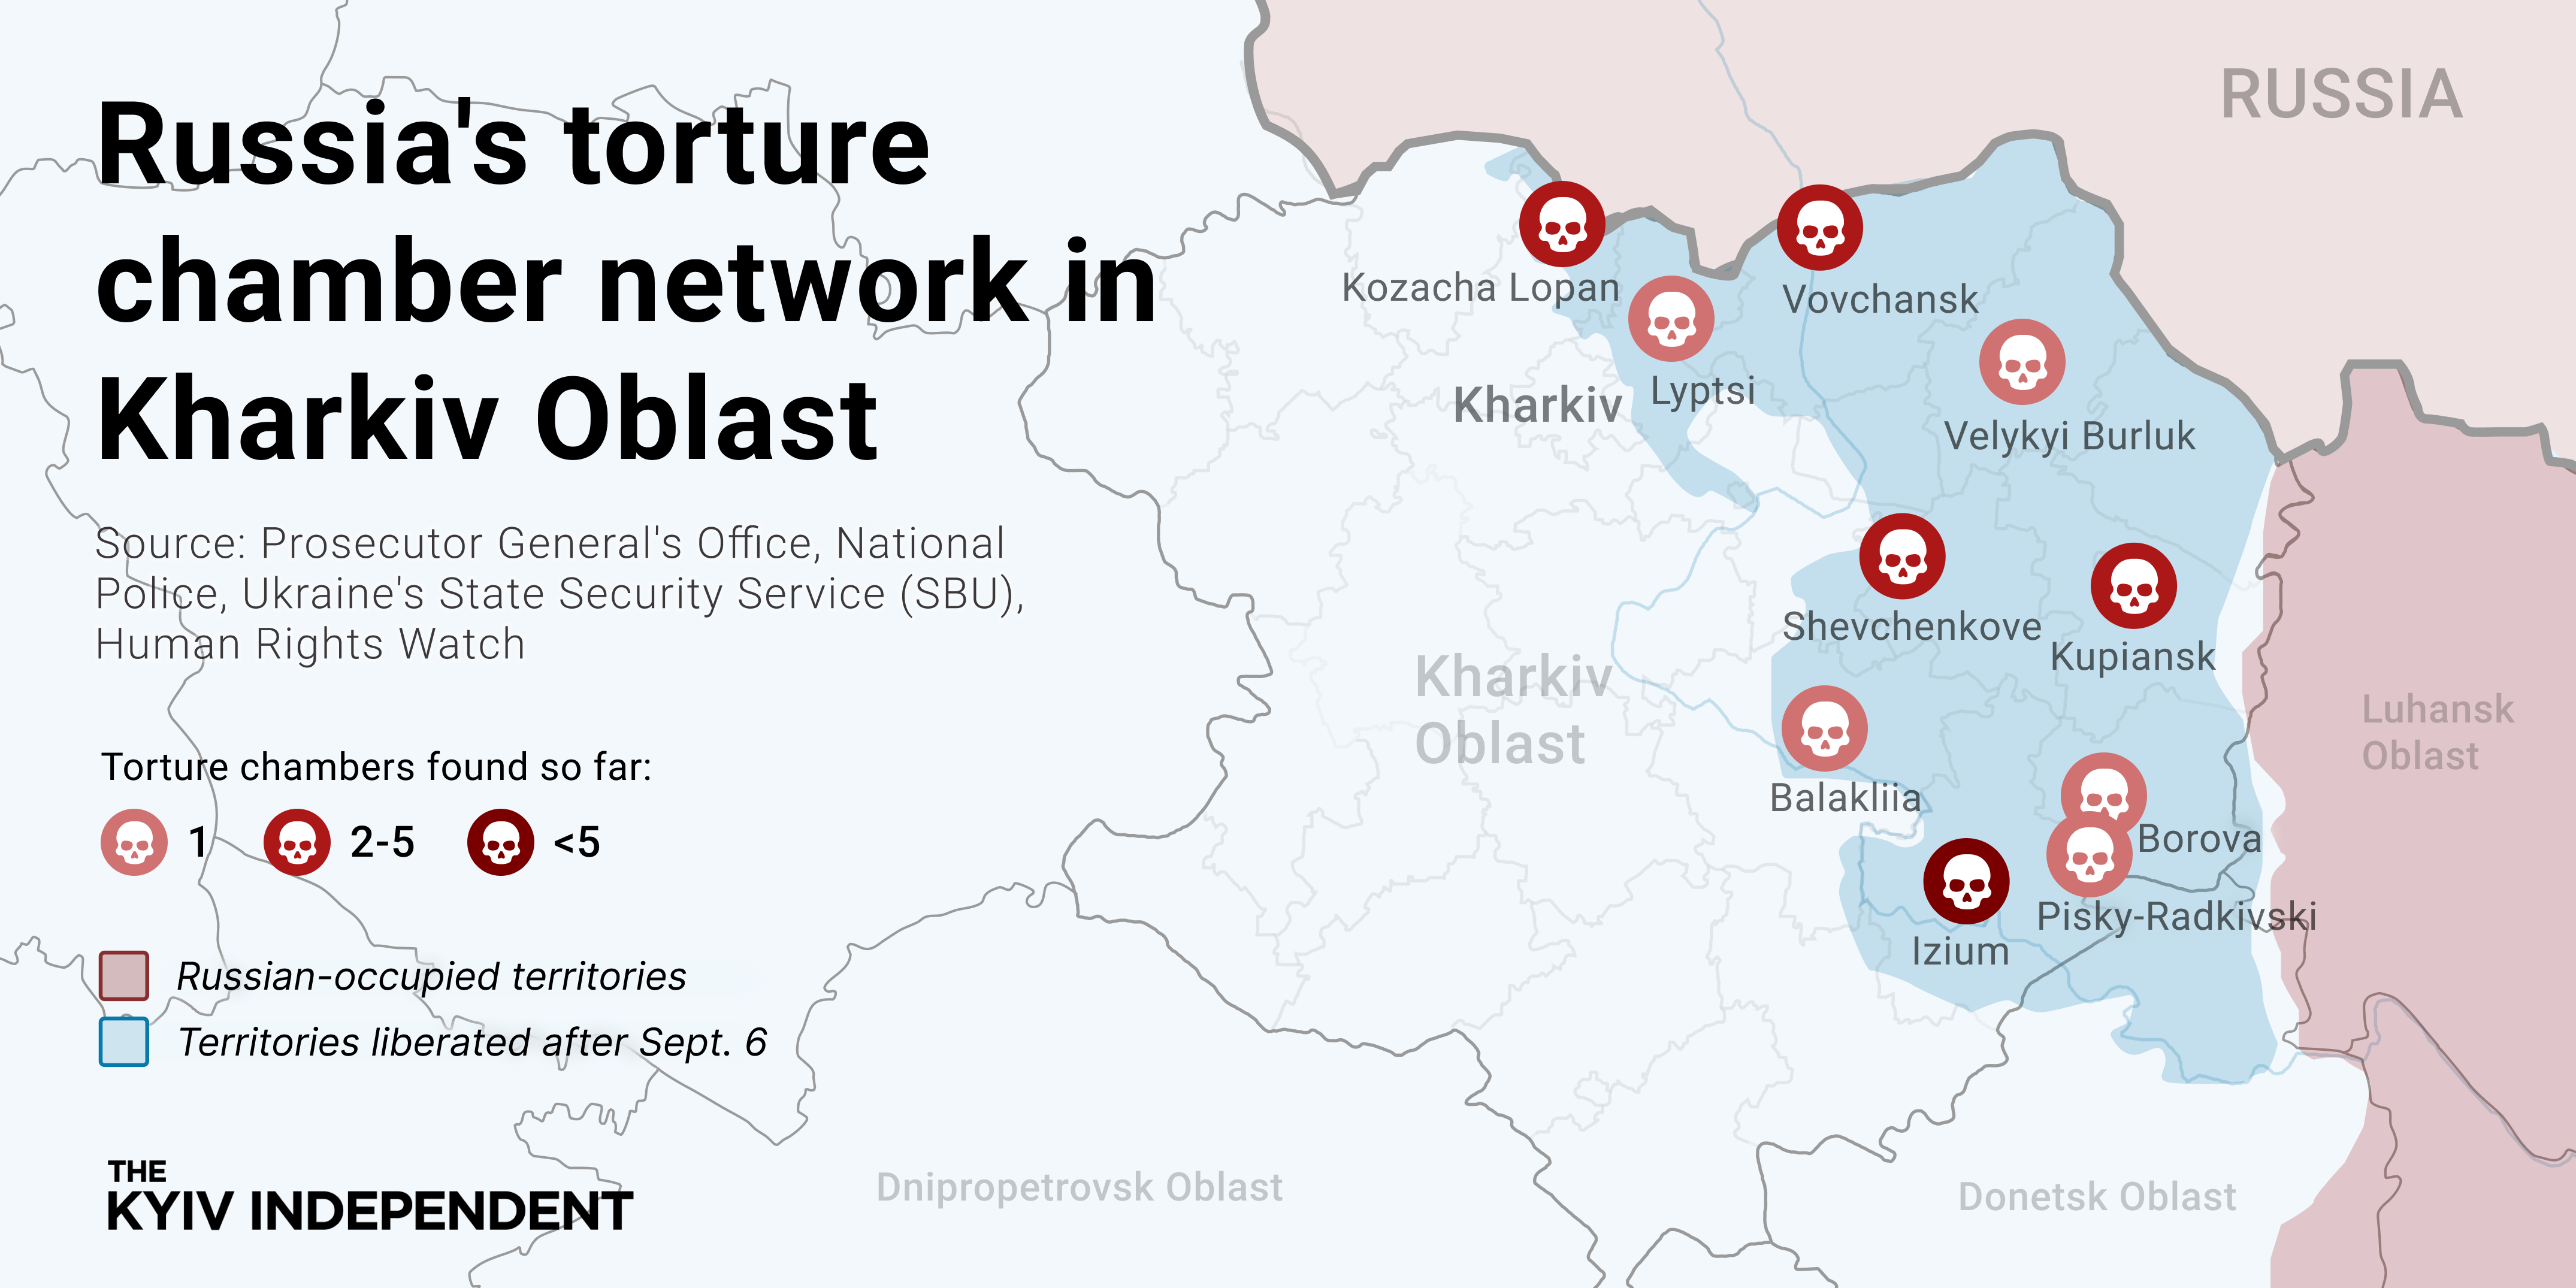 As of Oct. 6, local authorities uncovered 22 torture chambers in the Kharkiv Oblast in the wake of Ukraine's liberation of Russia-occupied territories. Russian forces set up detention centers in almost every city and village where they were based, often using the police station to detain and torture civilians, including Ukrainian veterans. Reports of torture by electric shock, severe beatings, nails being torn off, suffocation with gas masks, and rapes, keep emerging as local authorities investigate Russia's war crimes in the region. (Lisa Kukharska/ The Kyiv Independent)